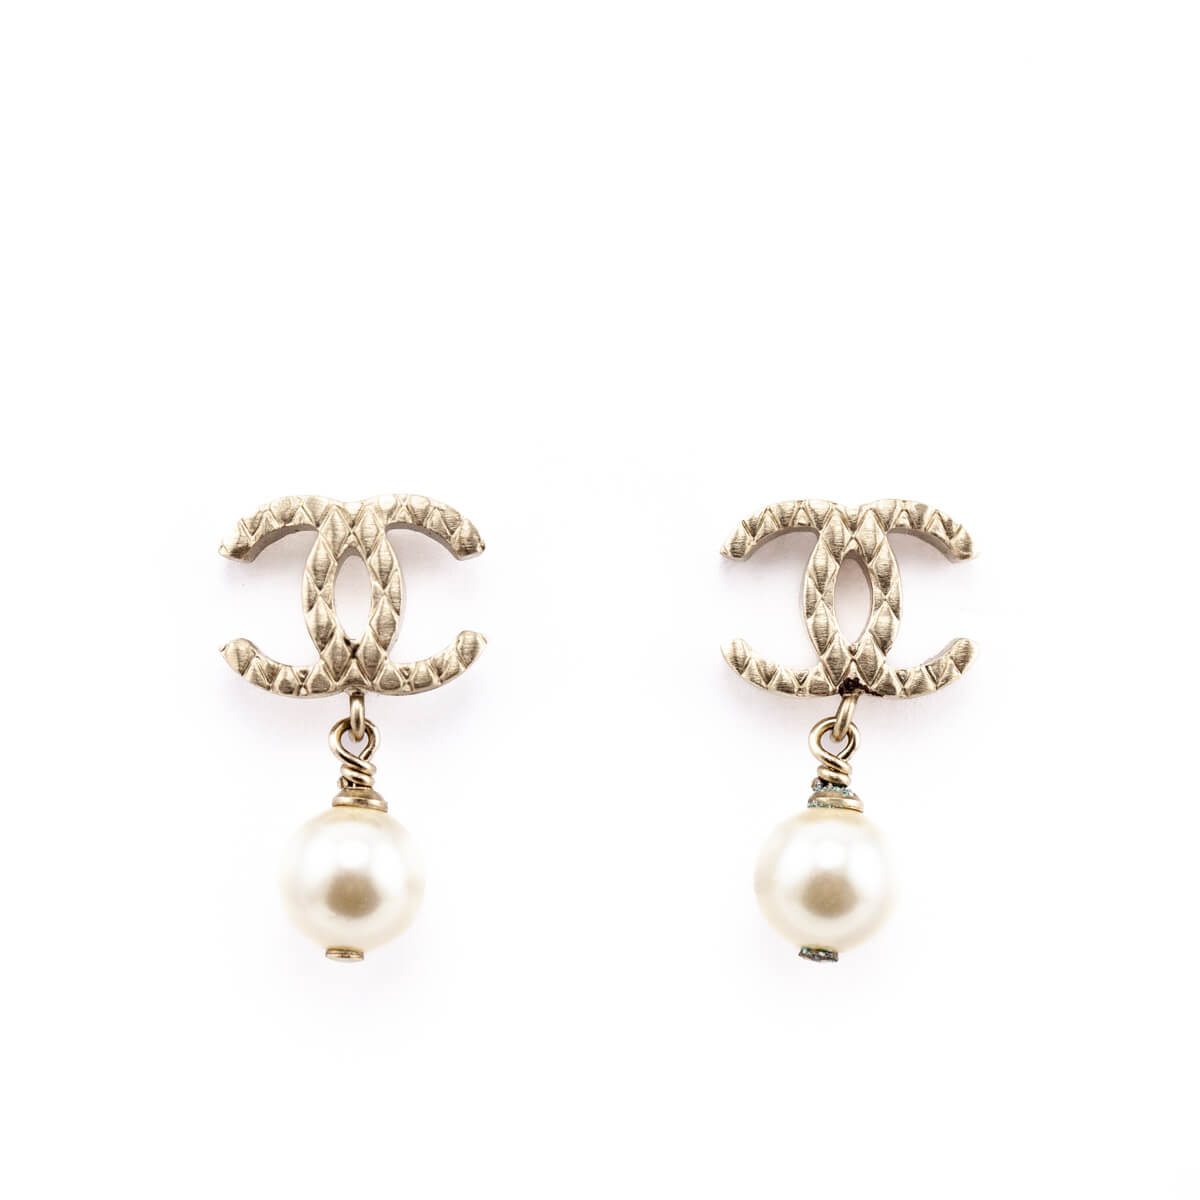 Chanel Gold Tone CC Faux Pearl Drop Earrings - Love that Bag etc - Preowned Authentic Designer Handbags & Preloved Fashions